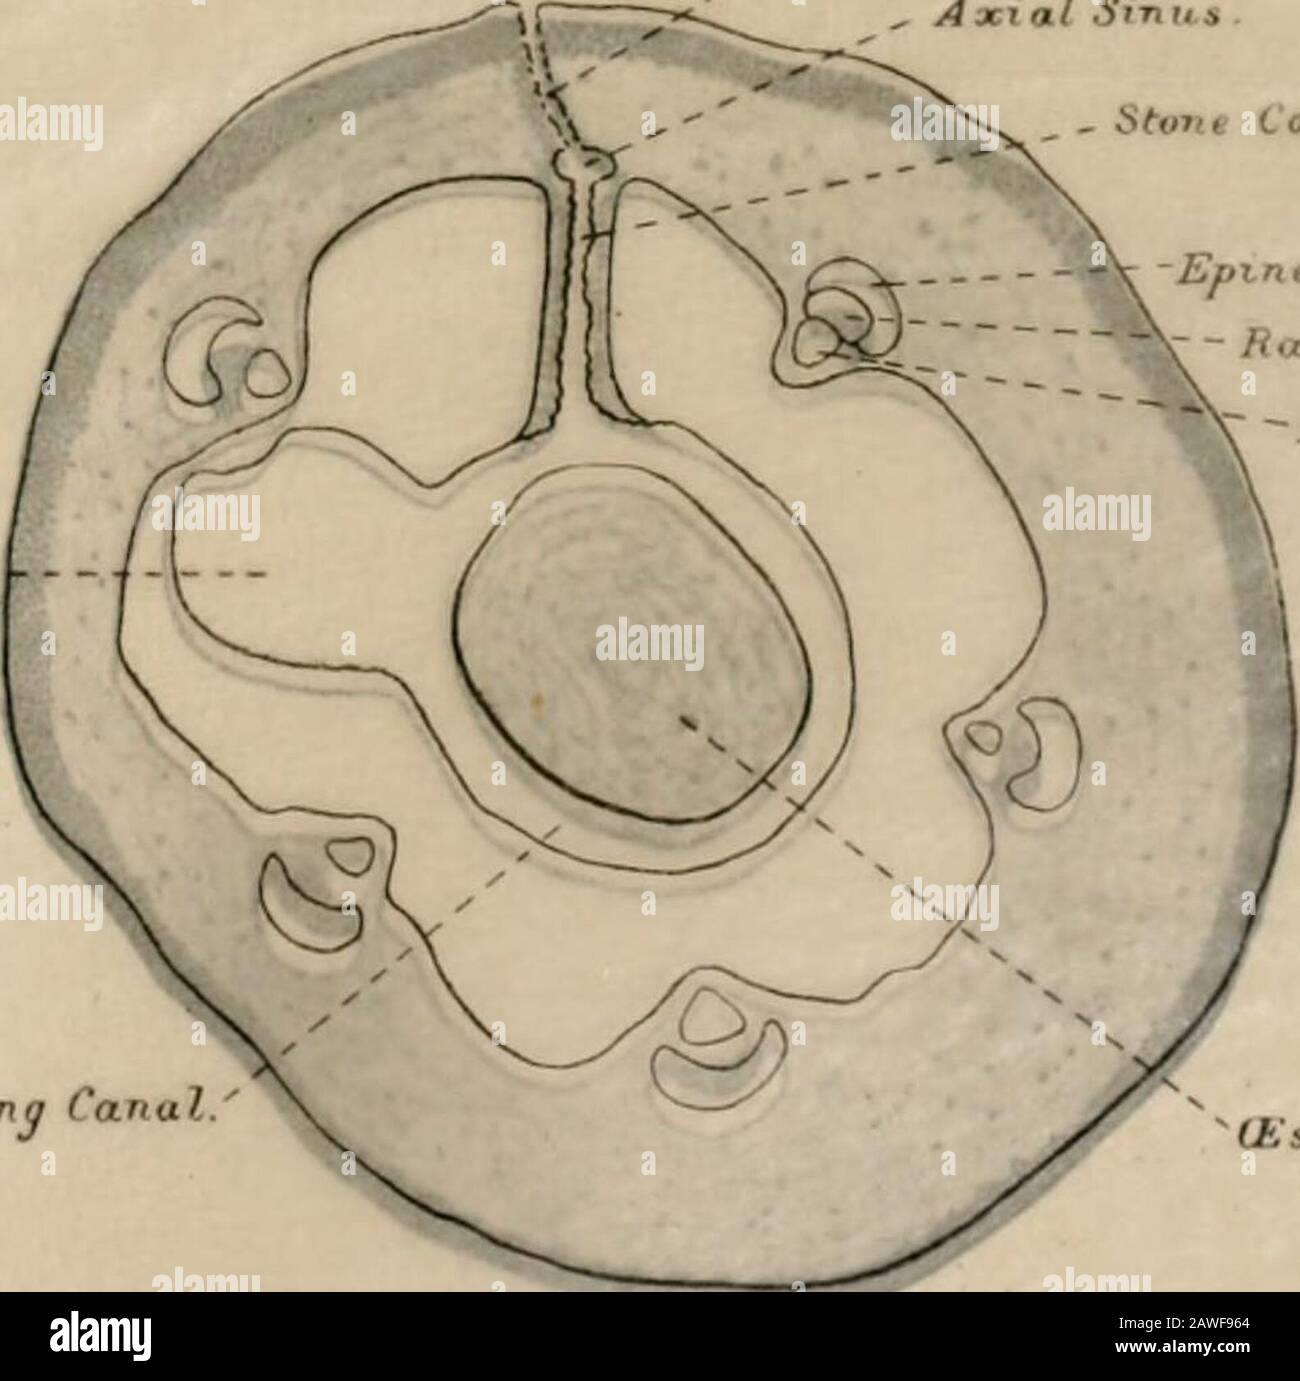 Natural history . Polian. Vesicle - FIG 6. CUCUMARIA CROCEA. Young embryo born aftercapture of motherx IZi.. Ring Canal IE soph a y FIG.?. CUCUMARIA CROCEA Transverse section throughanterior region of embryoshown in Fig 6 To be bound with plalr. [..irval l-icliiiioderius.Antarctic (Discovery) Exp eu3TUJ90IH=)0 S Oil OOXx .ITQHAH8booid &gt;o o^idms *•*-,« A3000D AlHAMUOllO 3|6nri9&gt; &gt;o A330HO AIRAMUOUD .6m&gt;o n A30000 AIHAMUOUO .3 mod &gt;o Stock Photo